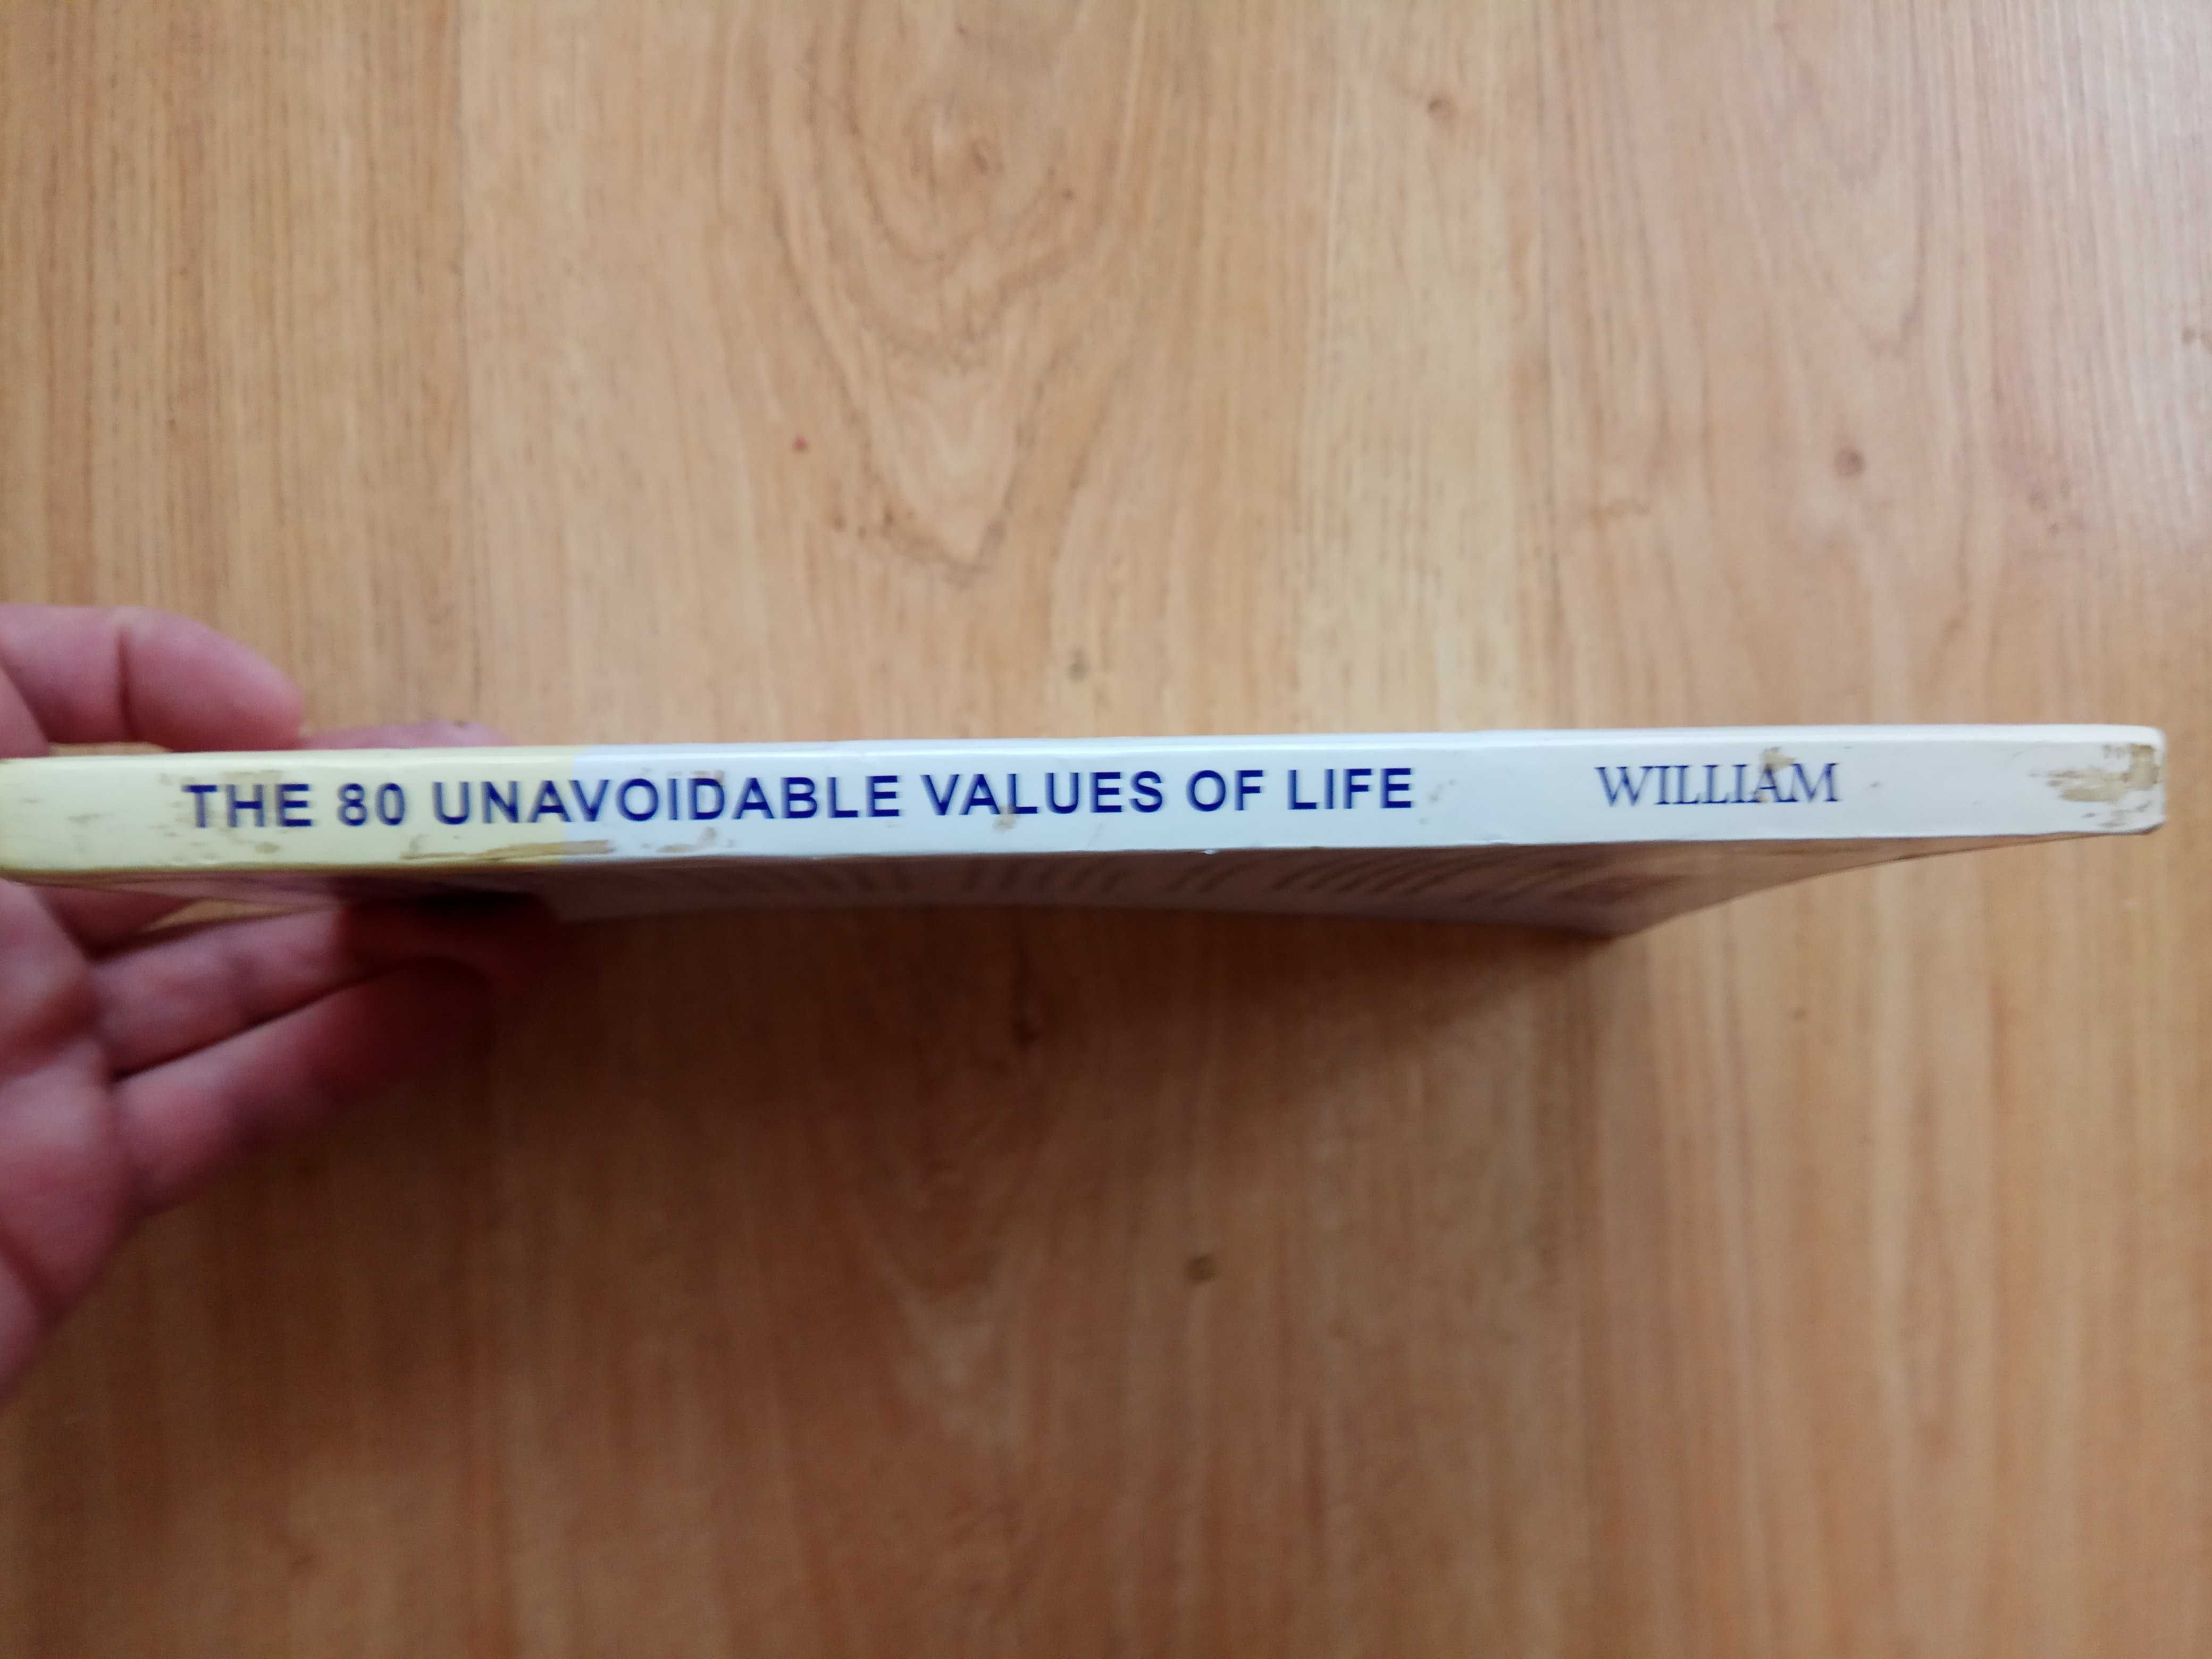 The 80 Unavoidable Values of Life Robert William